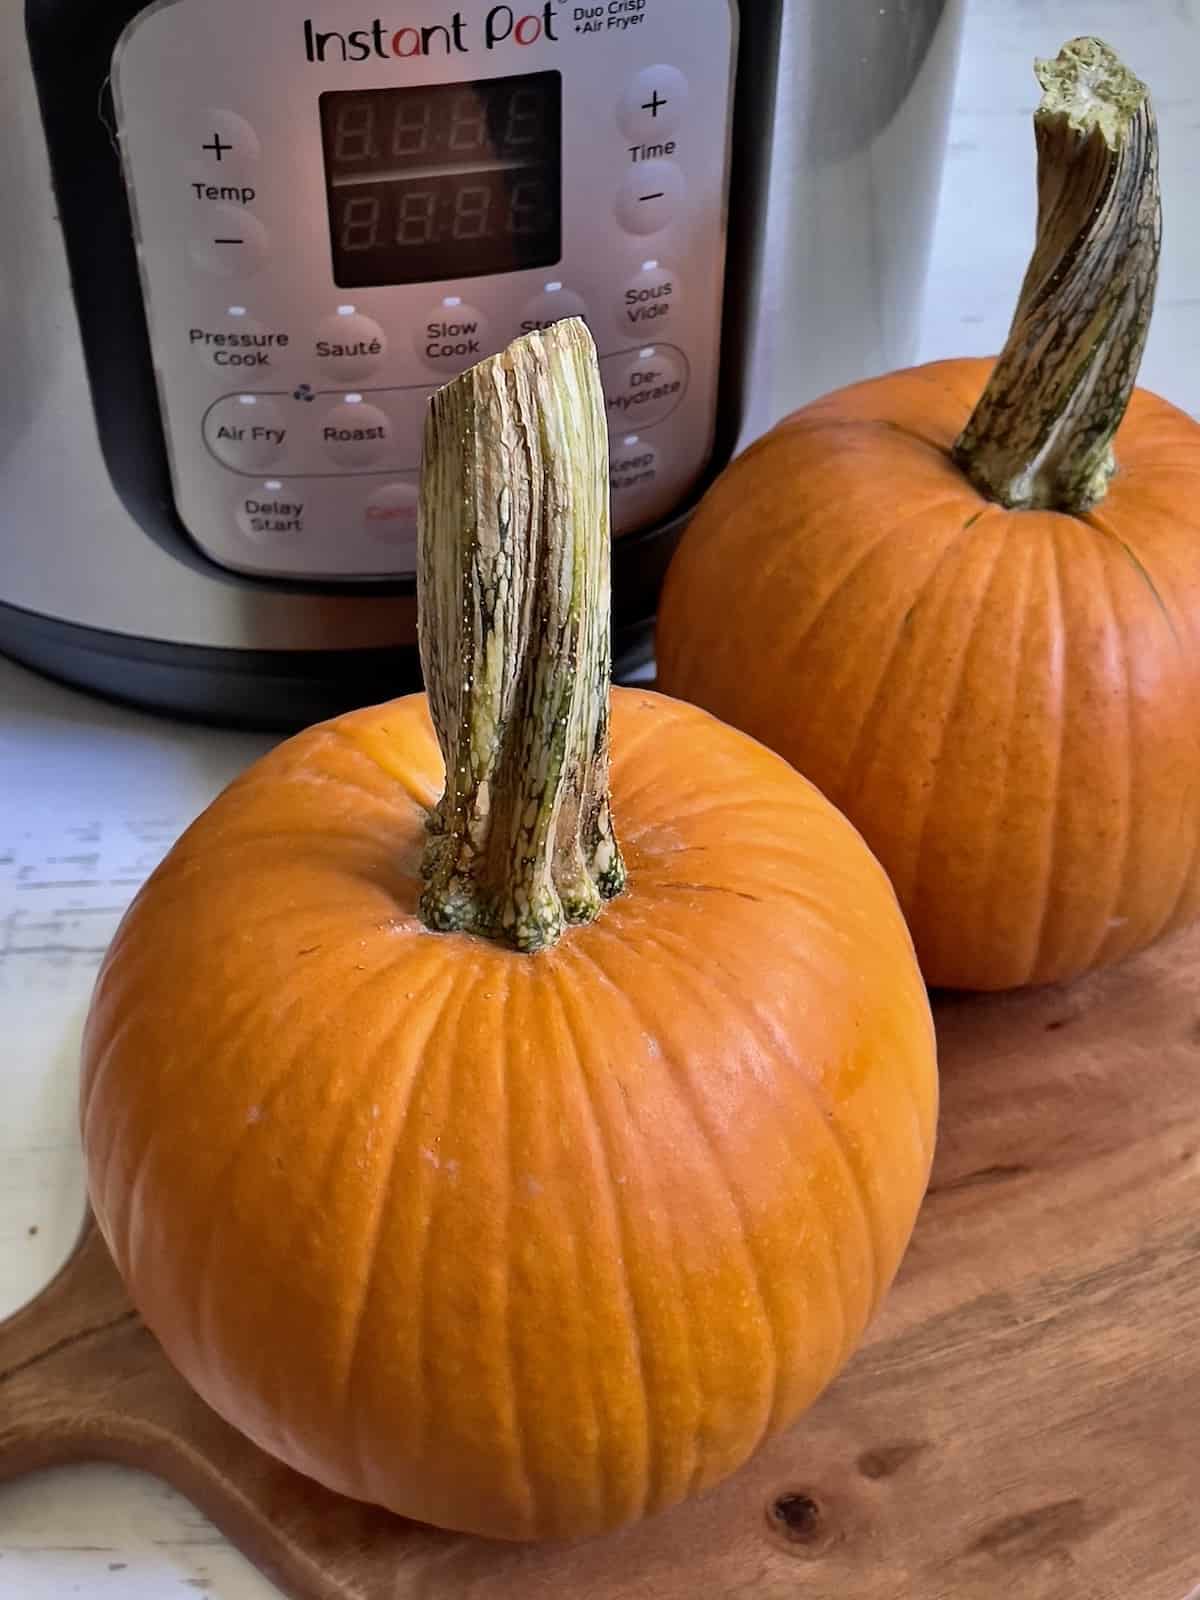 two pumpkins in front of an Instant Pot